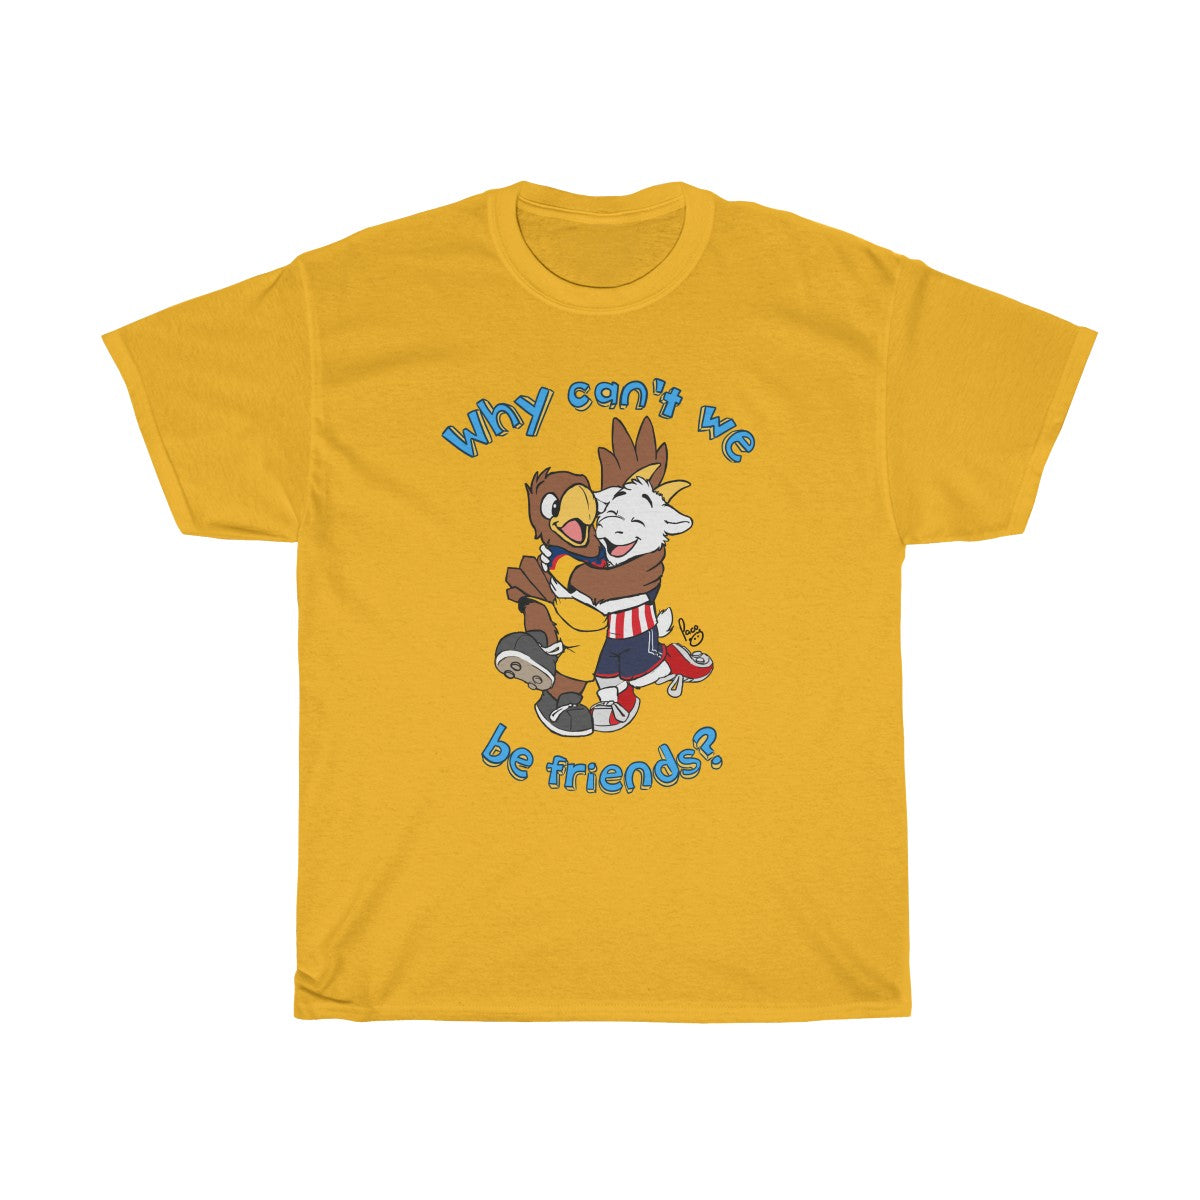 Why Can't we be Friends? - T-Shirt T-Shirt Paco Panda Gold S 